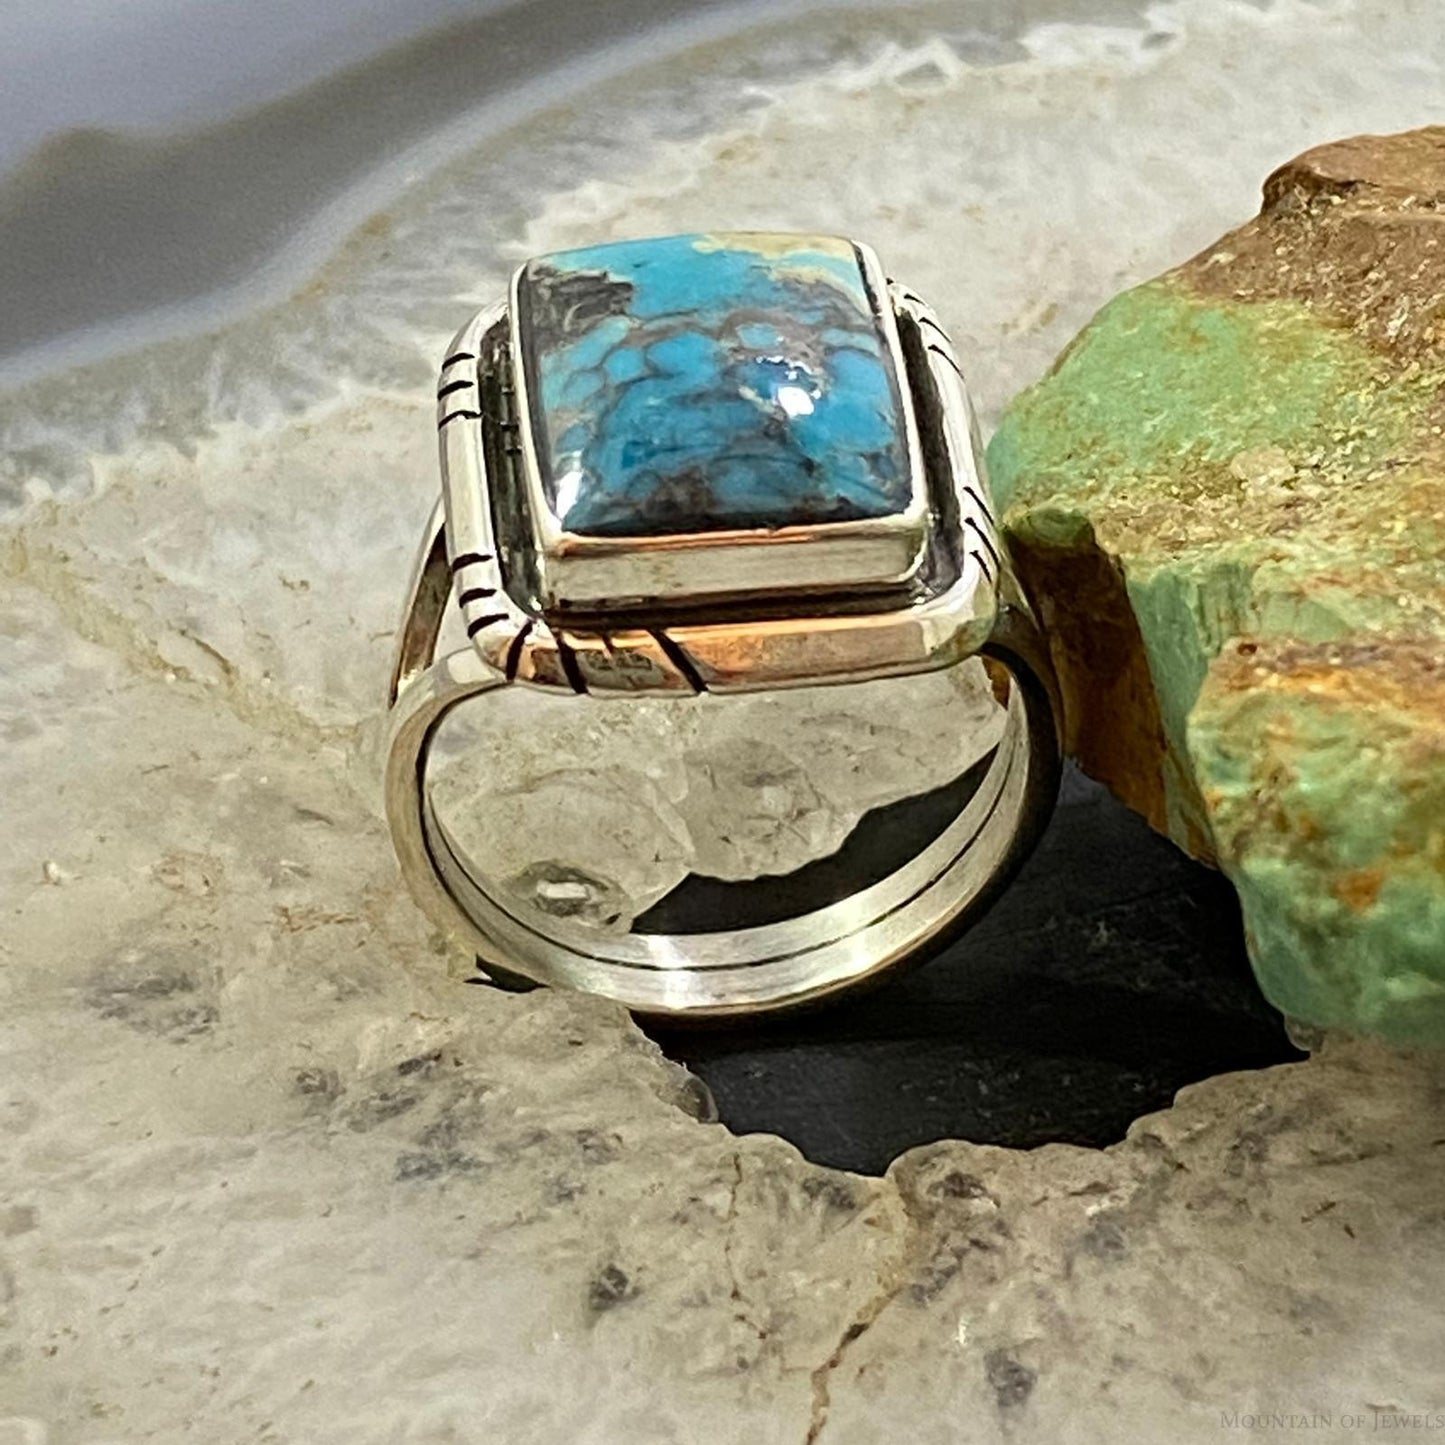 Native American Sterling Silver Rectangle Blue Ridge Turquoise Mini Bar Ring Size 8.25 For Women